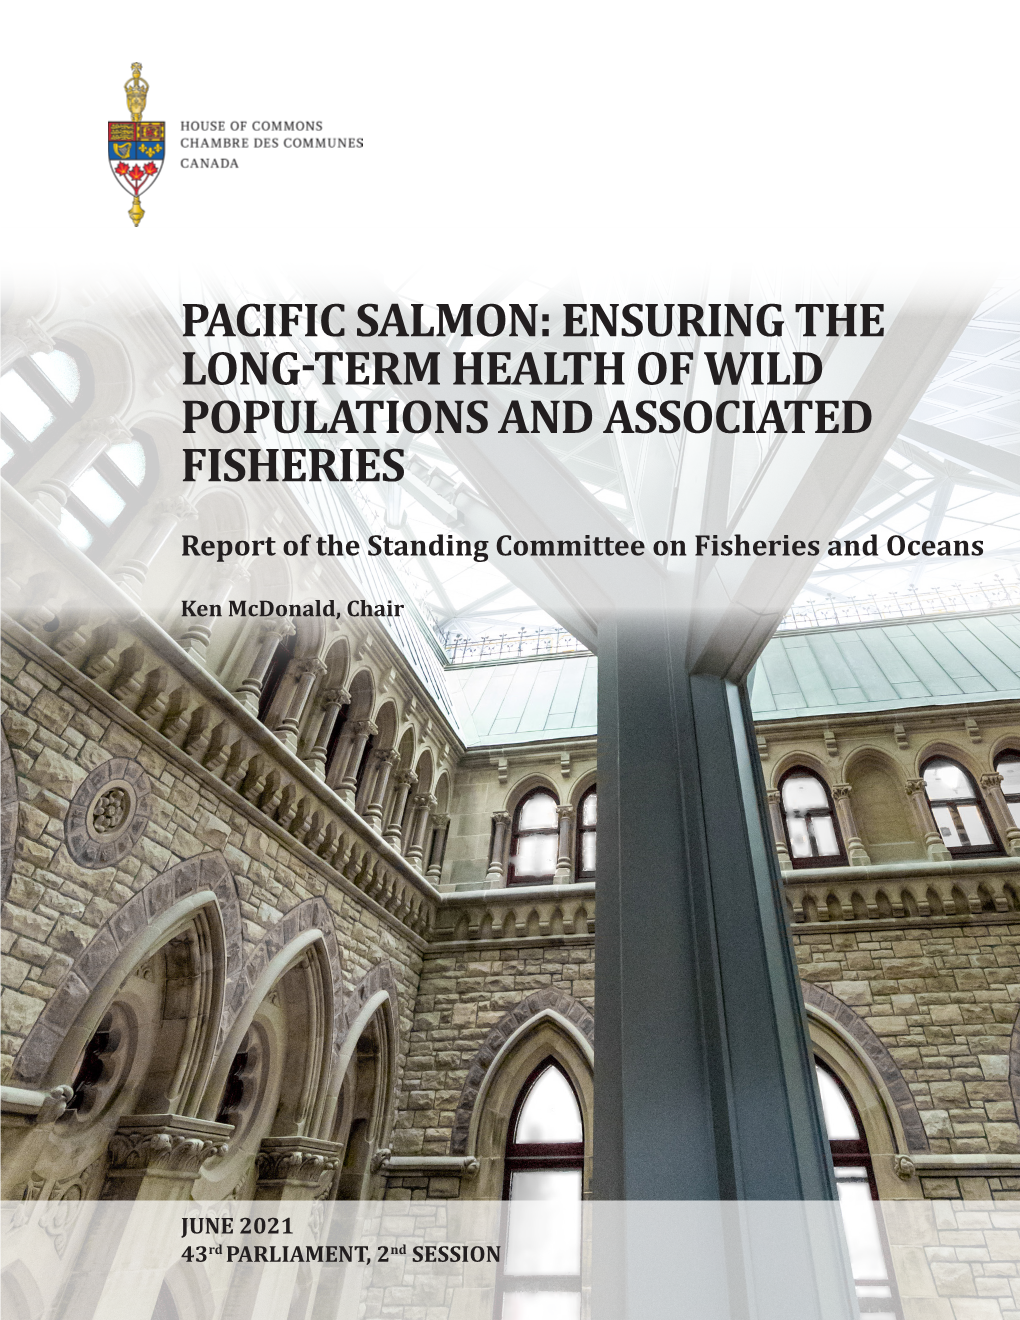 Pacific Salmon: Ensuring the Long-Term Health of Wild Populations and Associated Fisheries